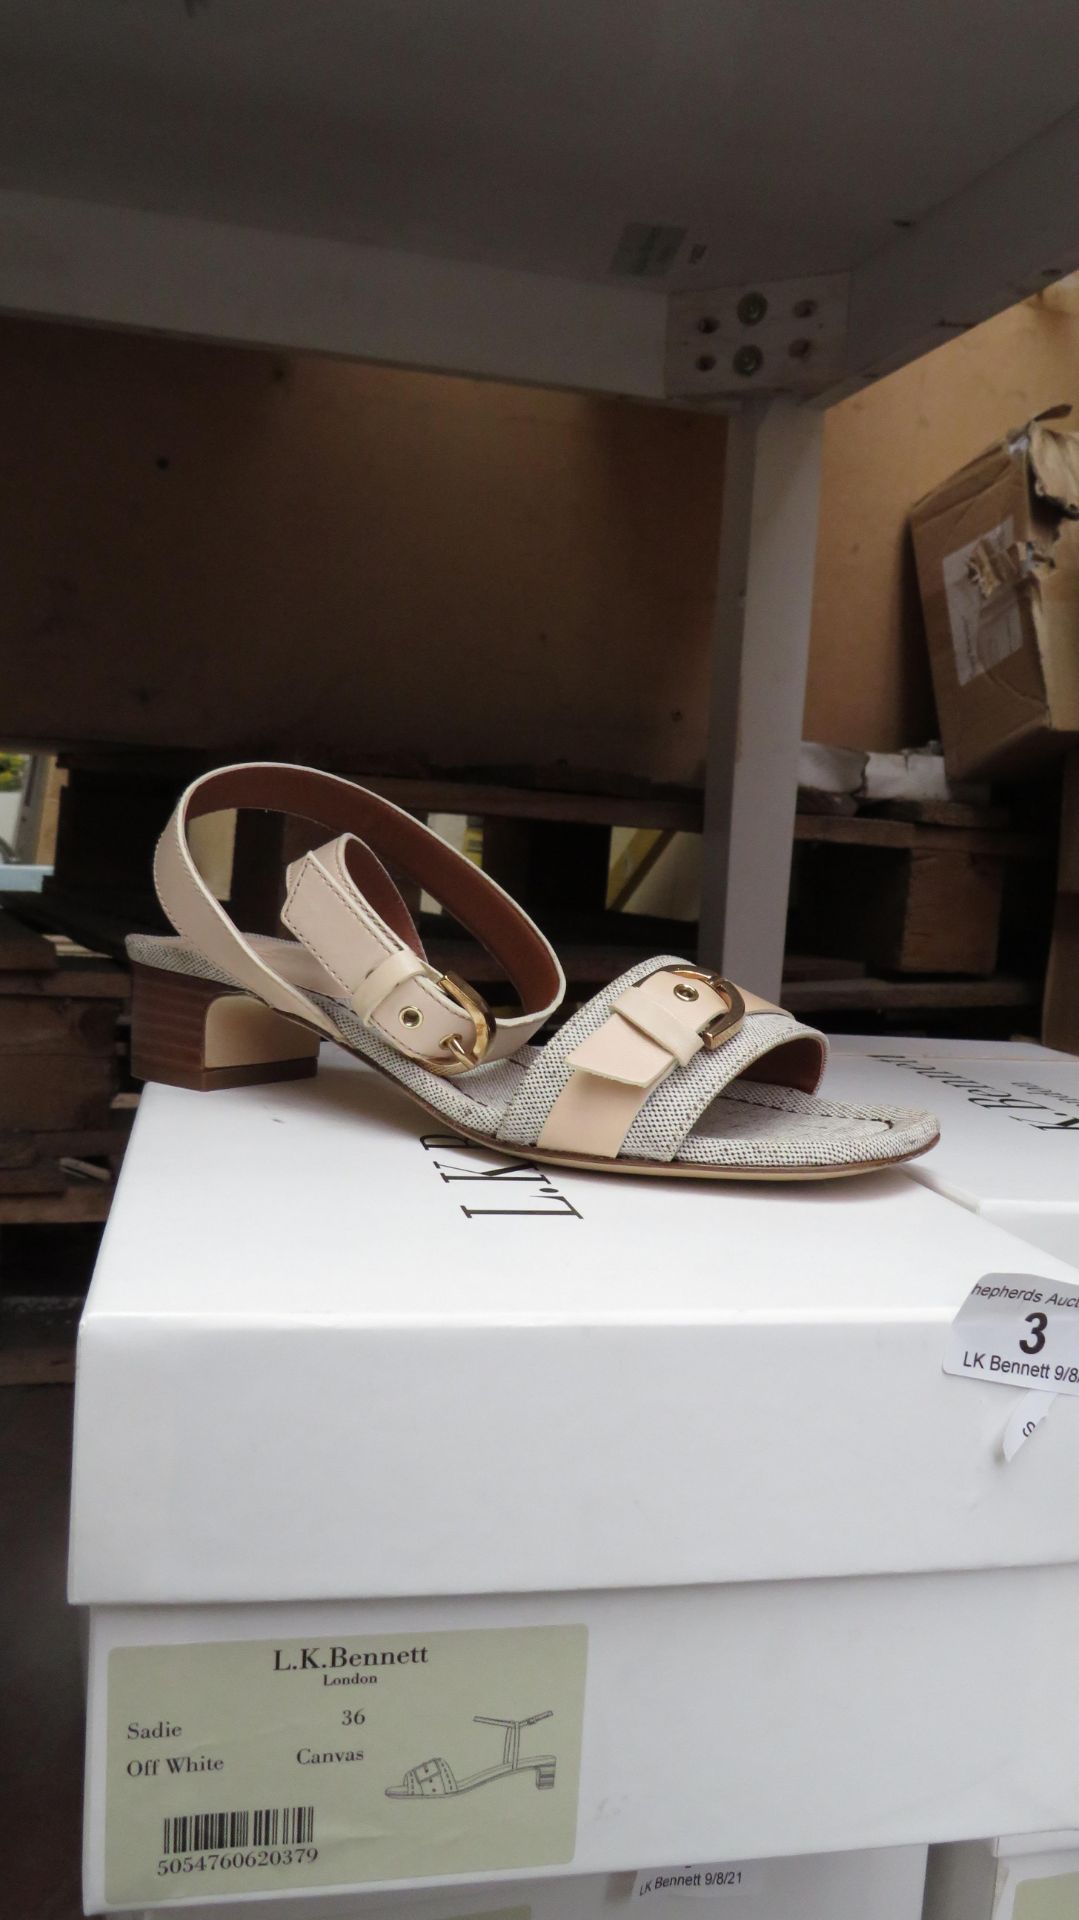 L K Bennett London Sadie Off White Canvas Sandals size 41 RRP £195 new & boxed see image for design